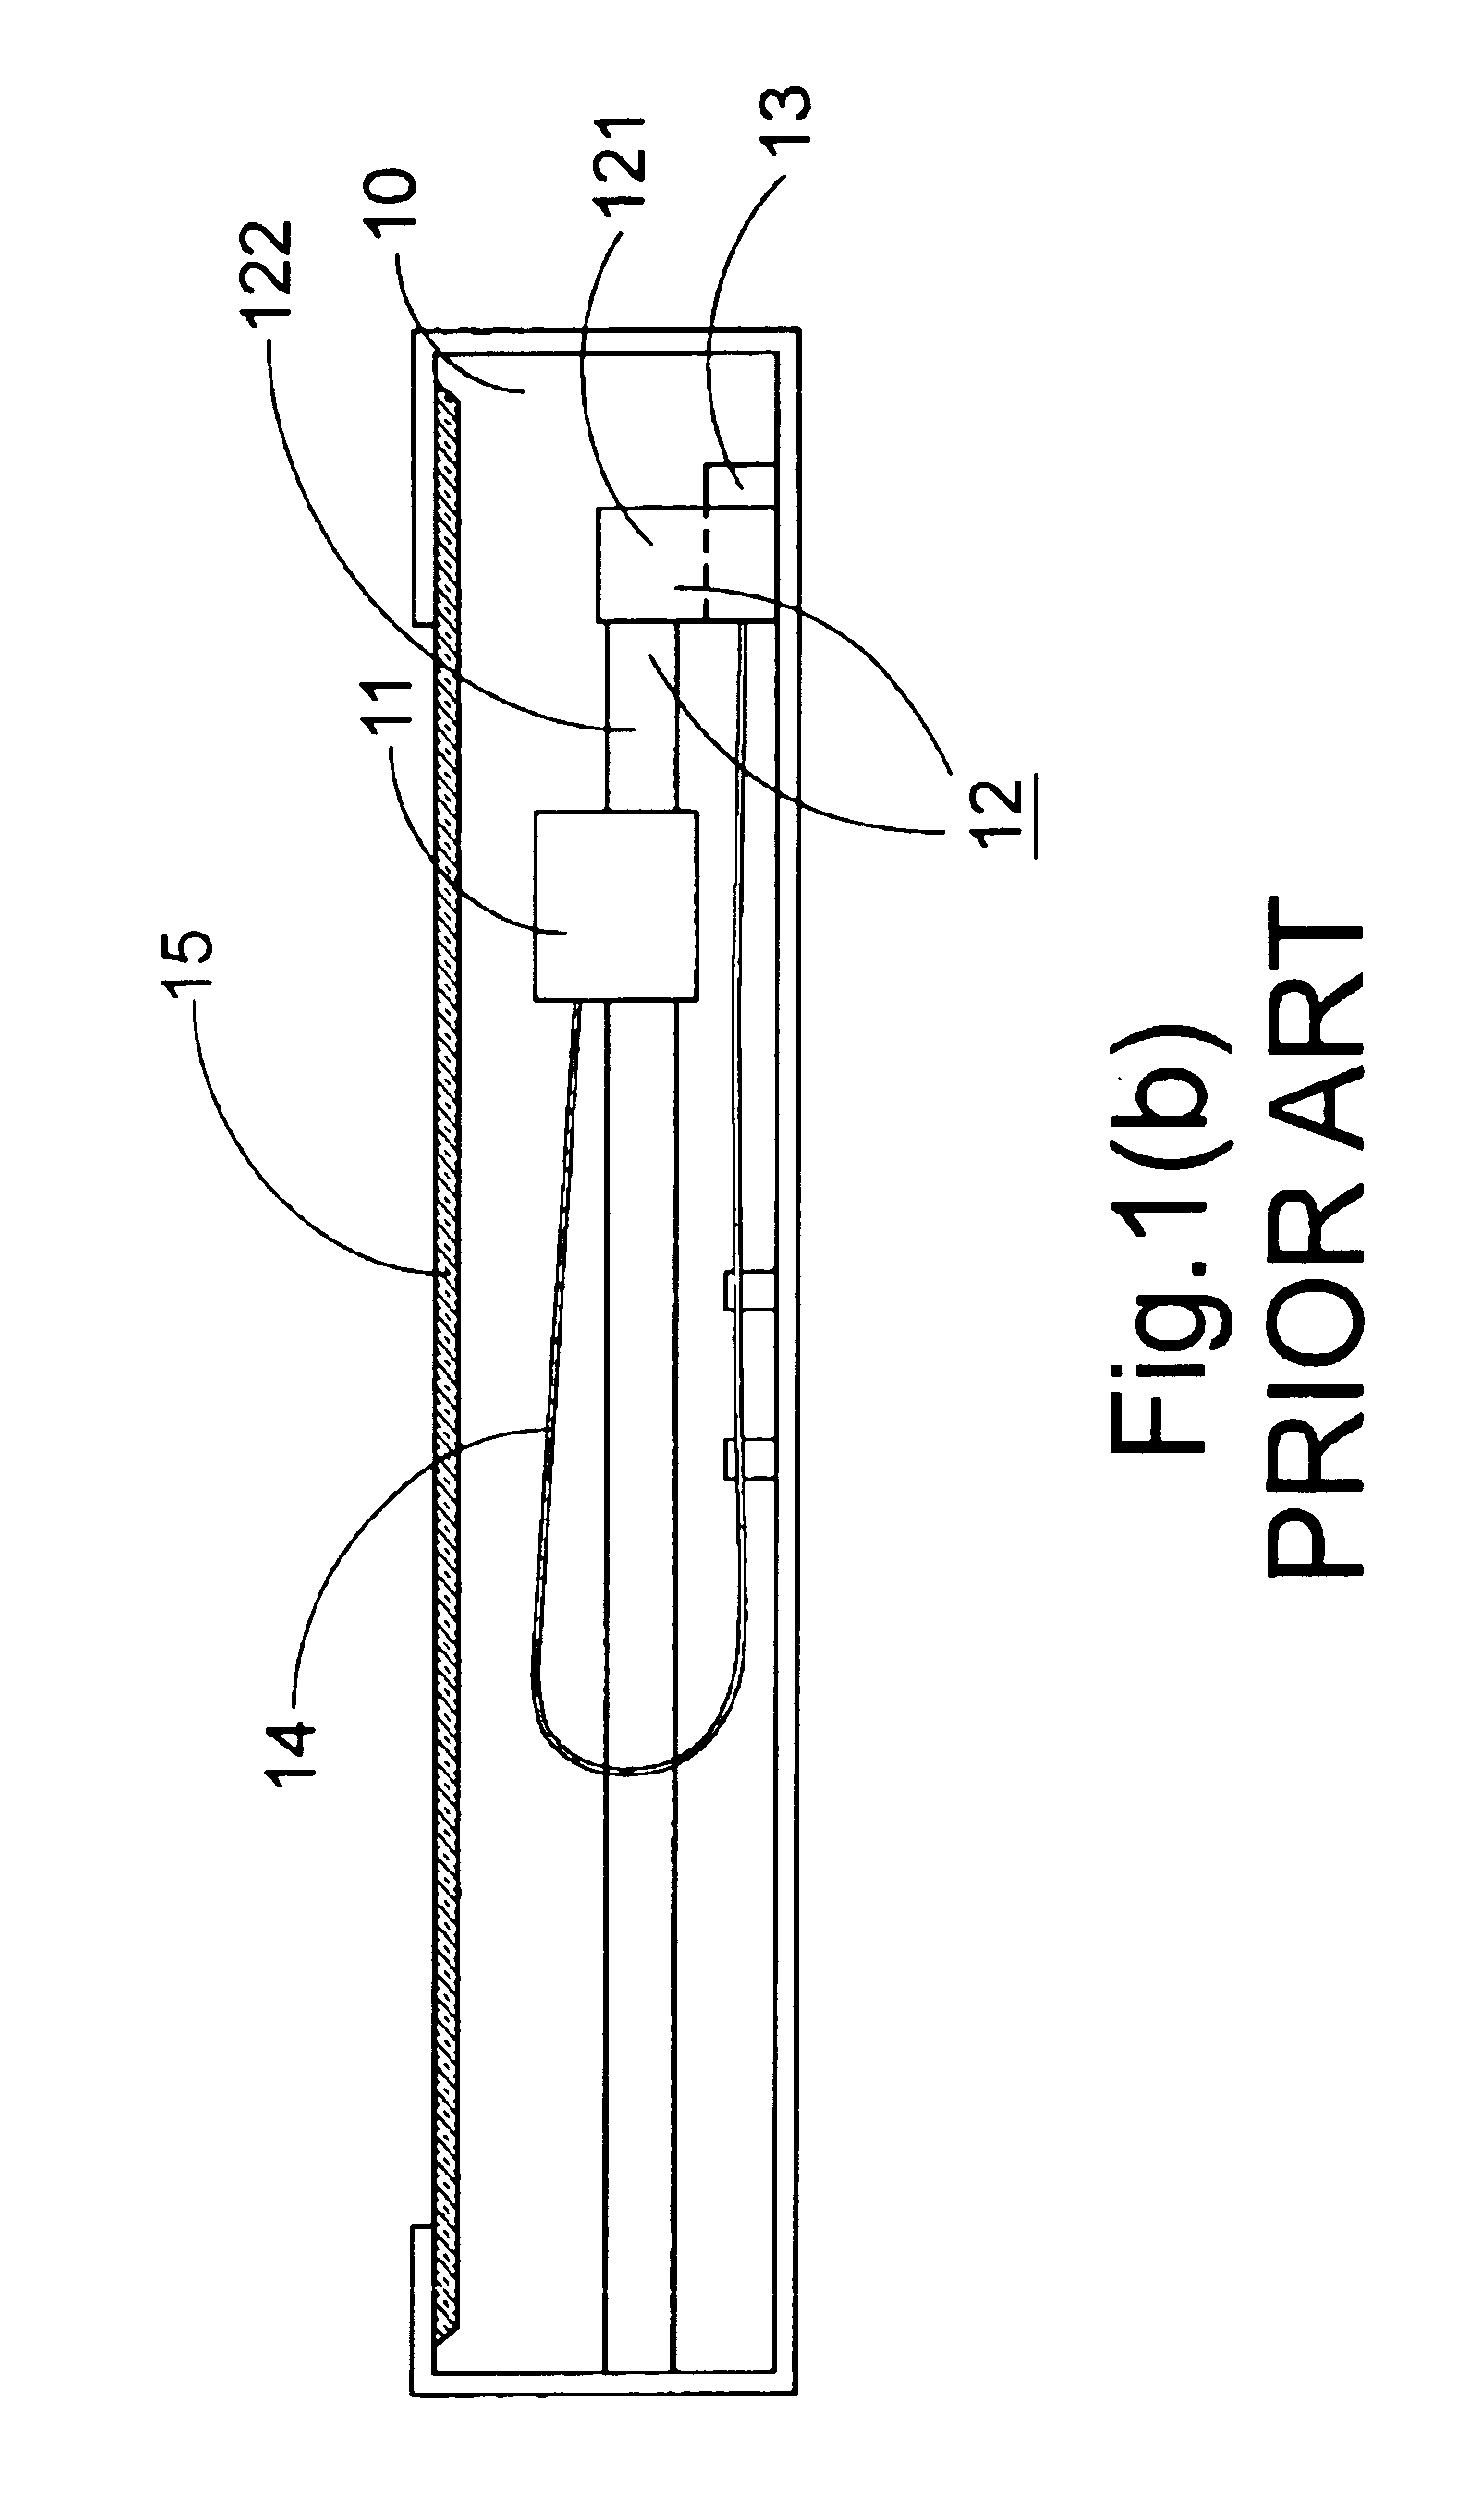 Anti-abrasive mechanism confining flat flexible cable in position in flatbed image scanner